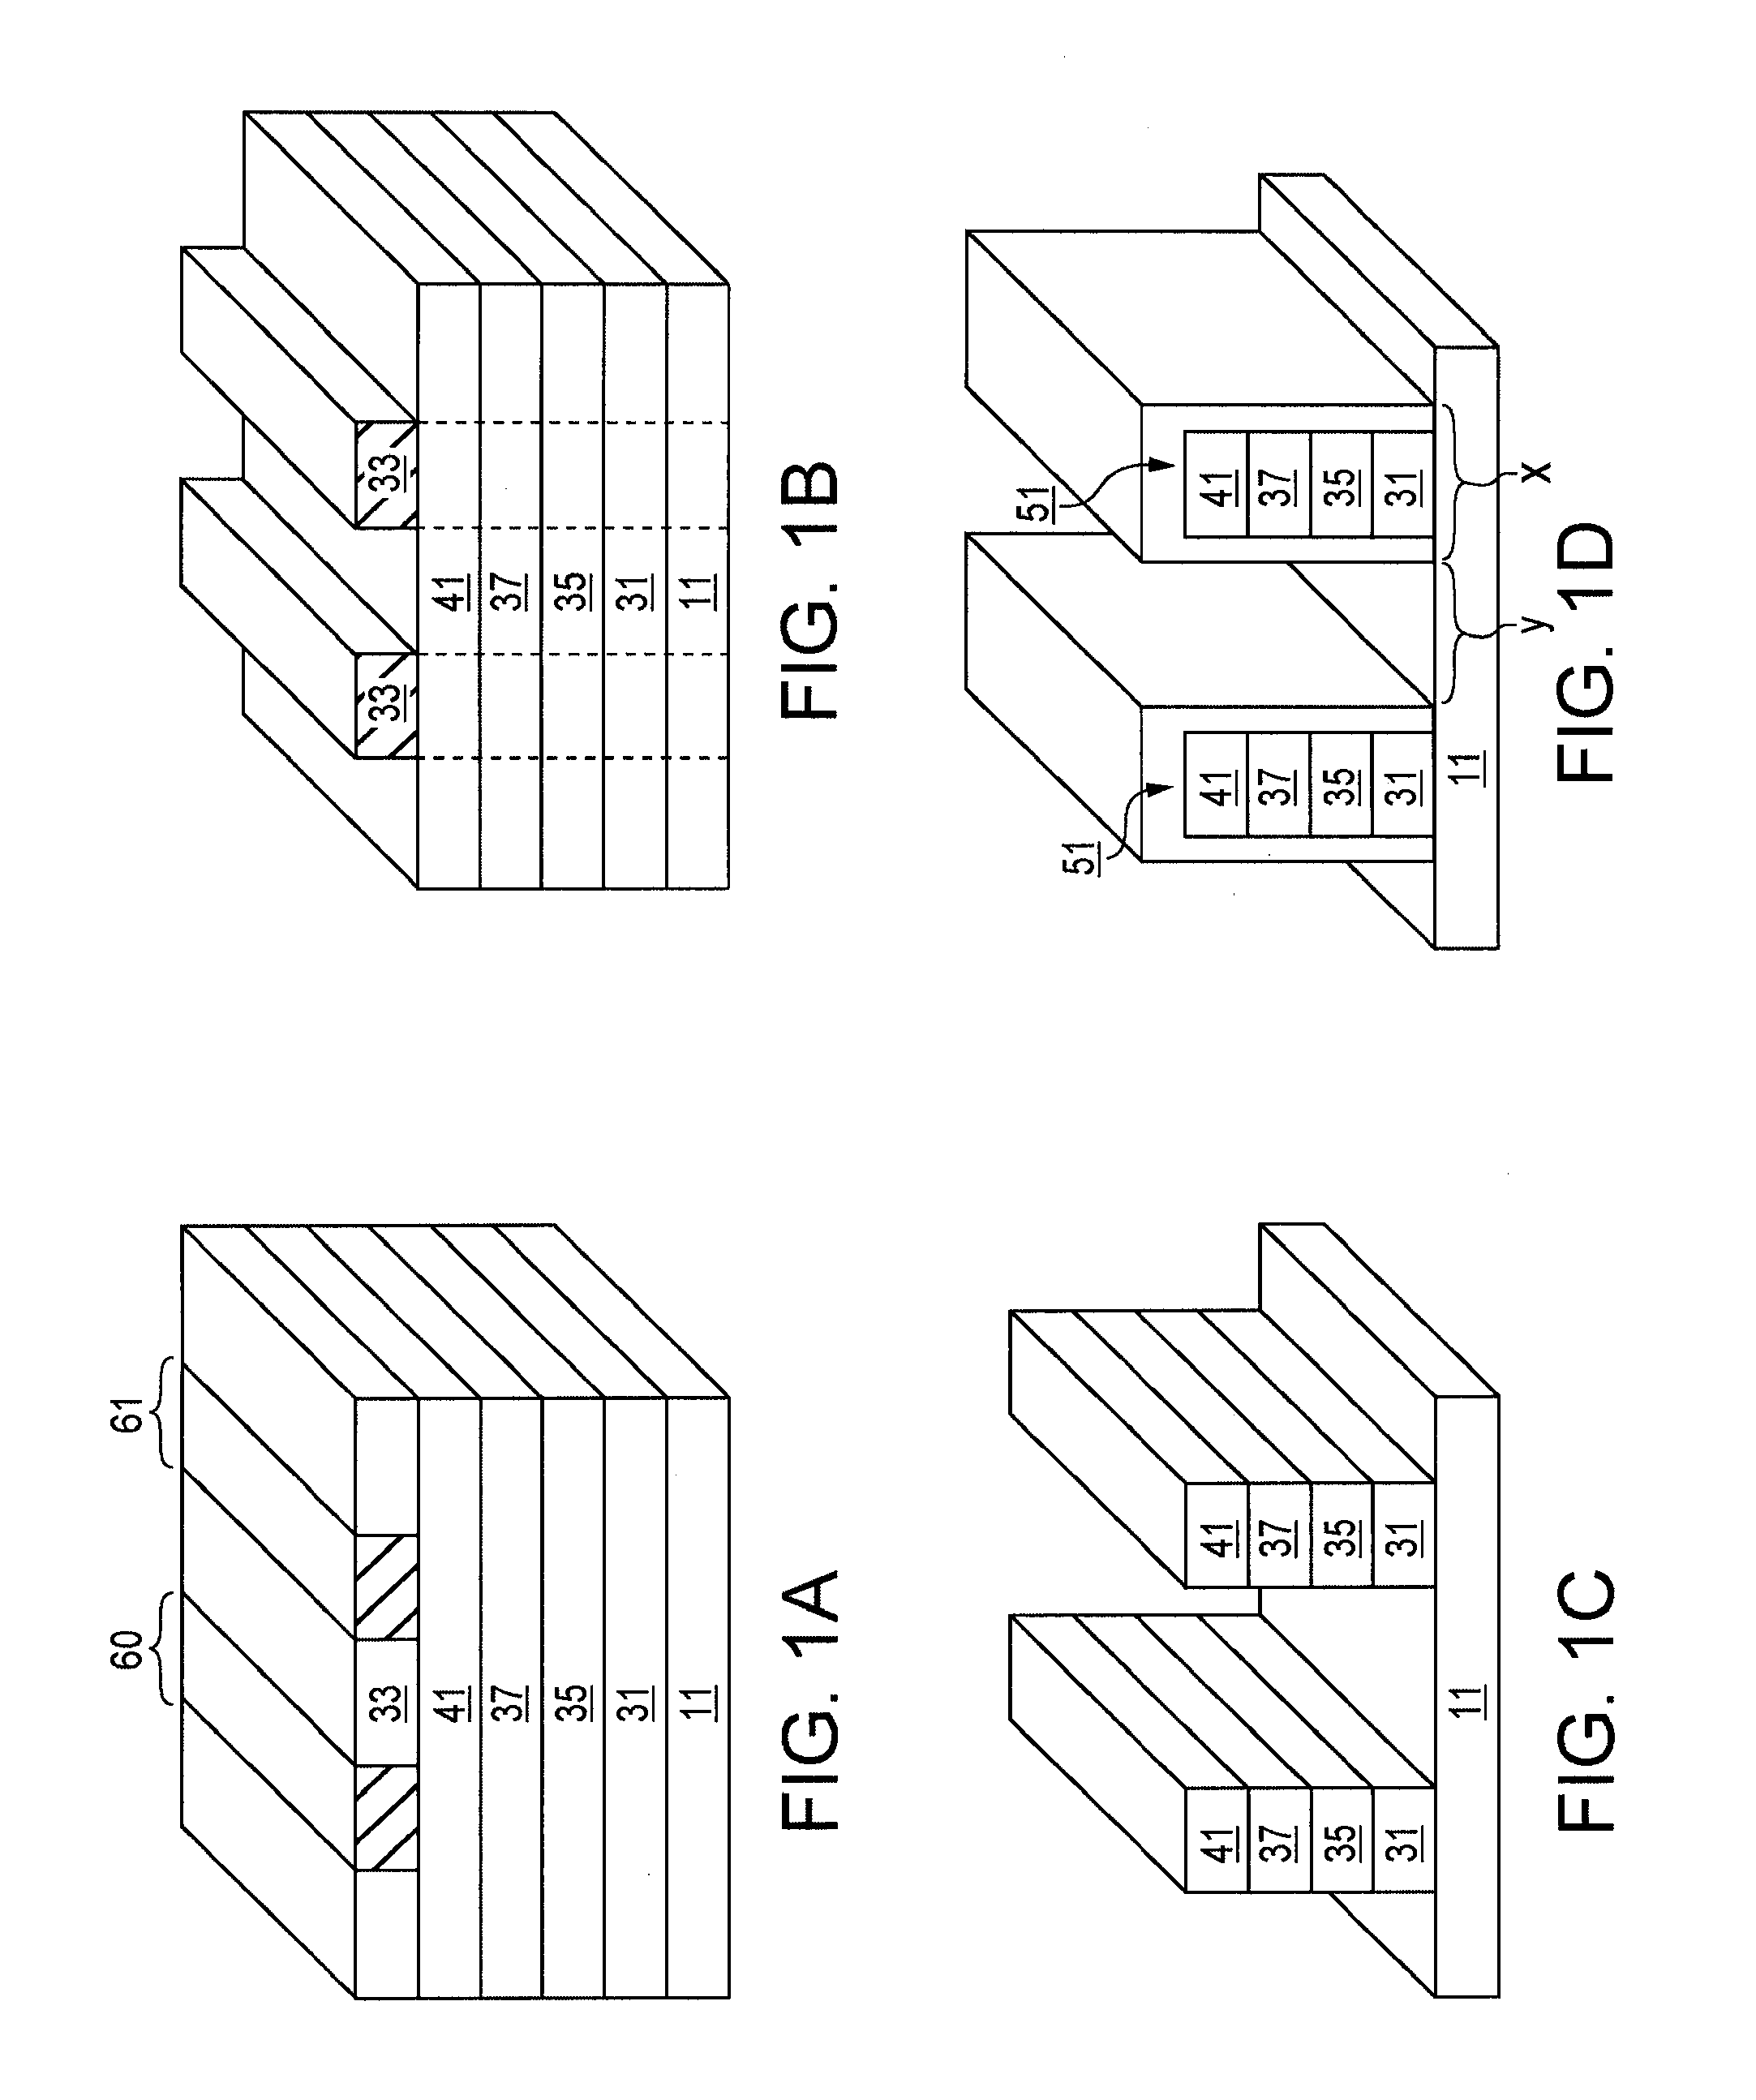 Method for providing electrical connections to spaced conductive lines